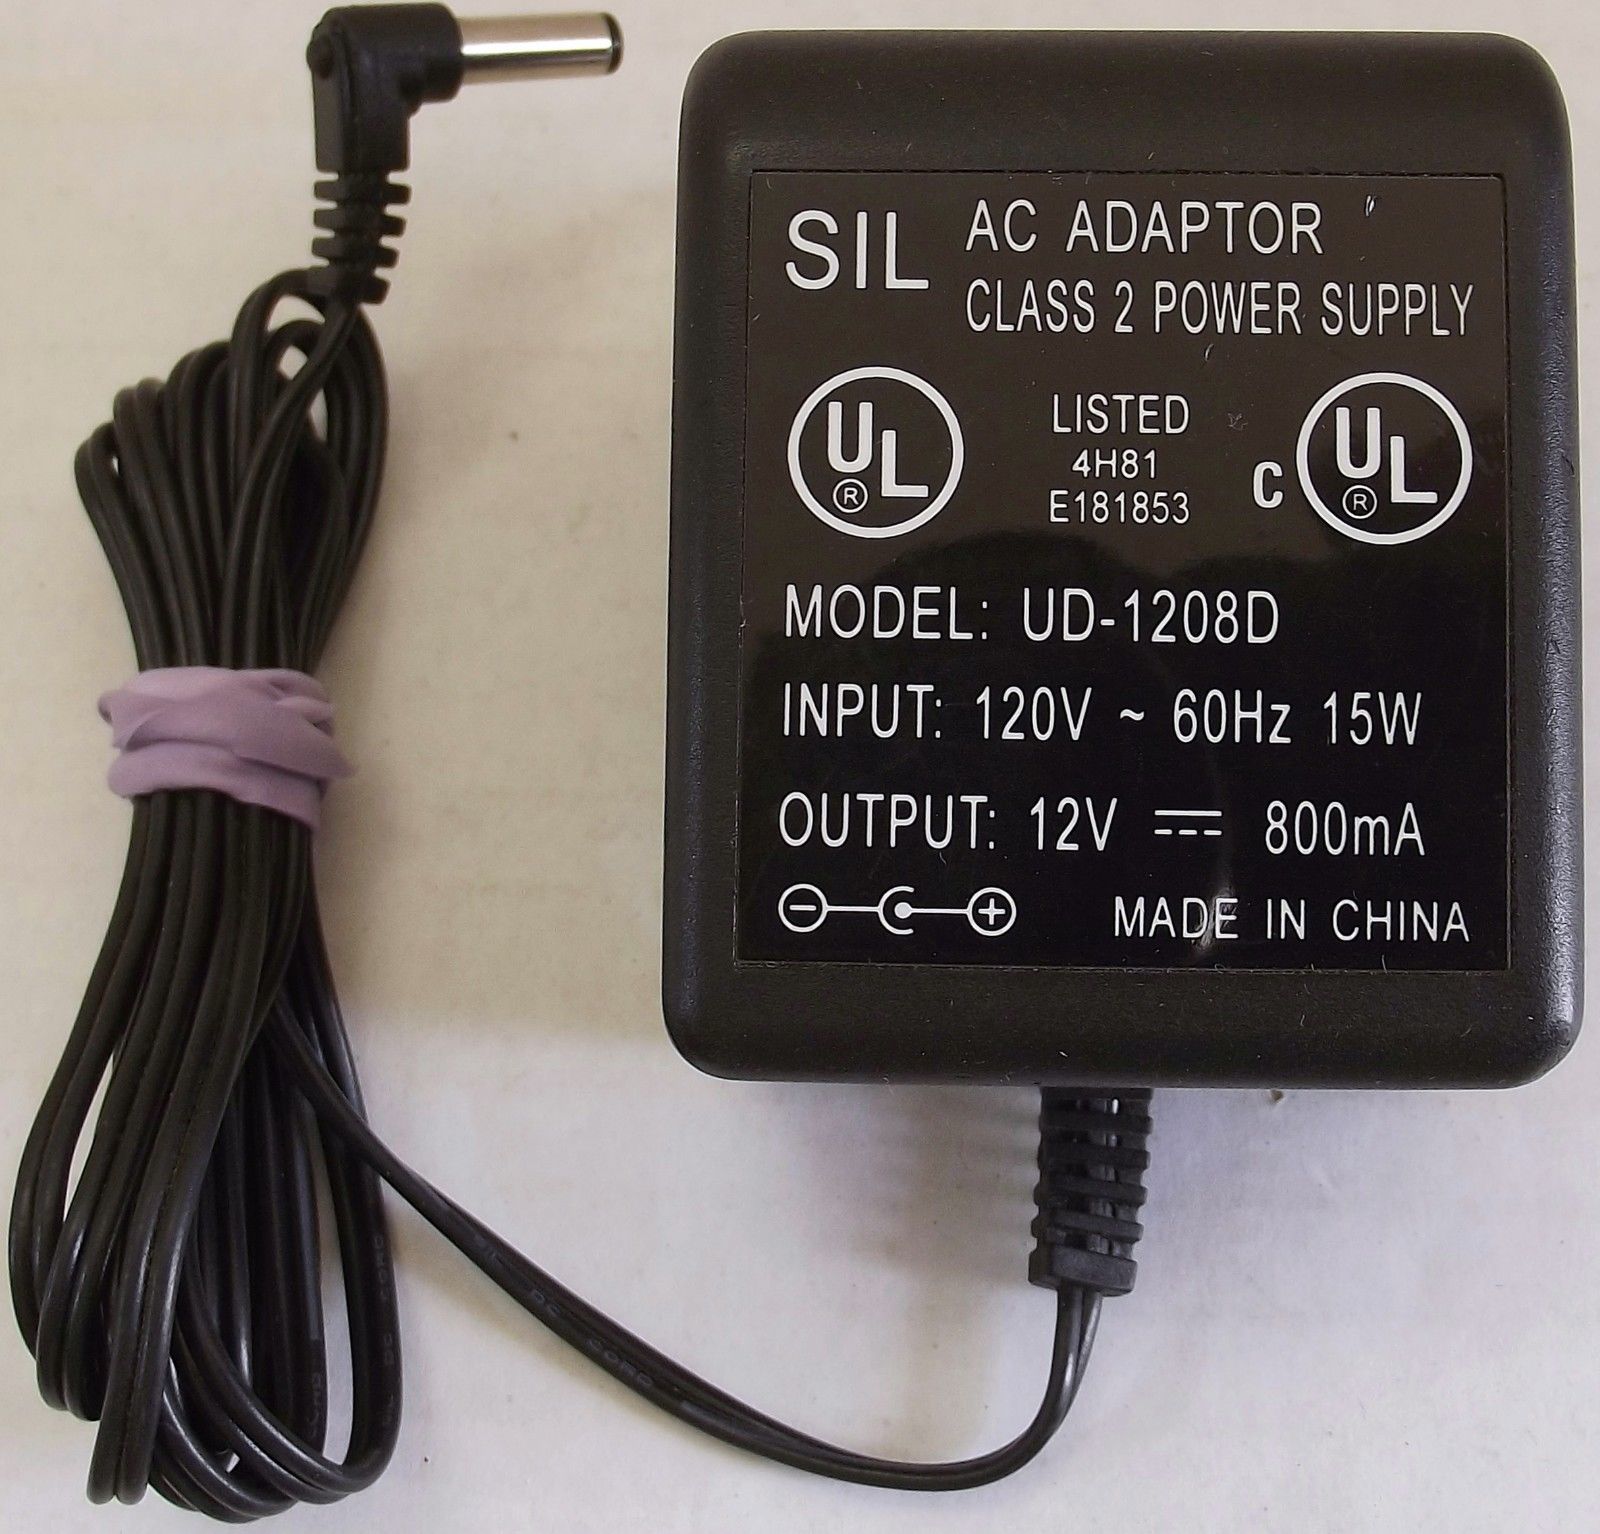 New 12V 800mA SIL UD-1208D Class 2 Transformer Power Supply Ac Adapter - Click Image to Close